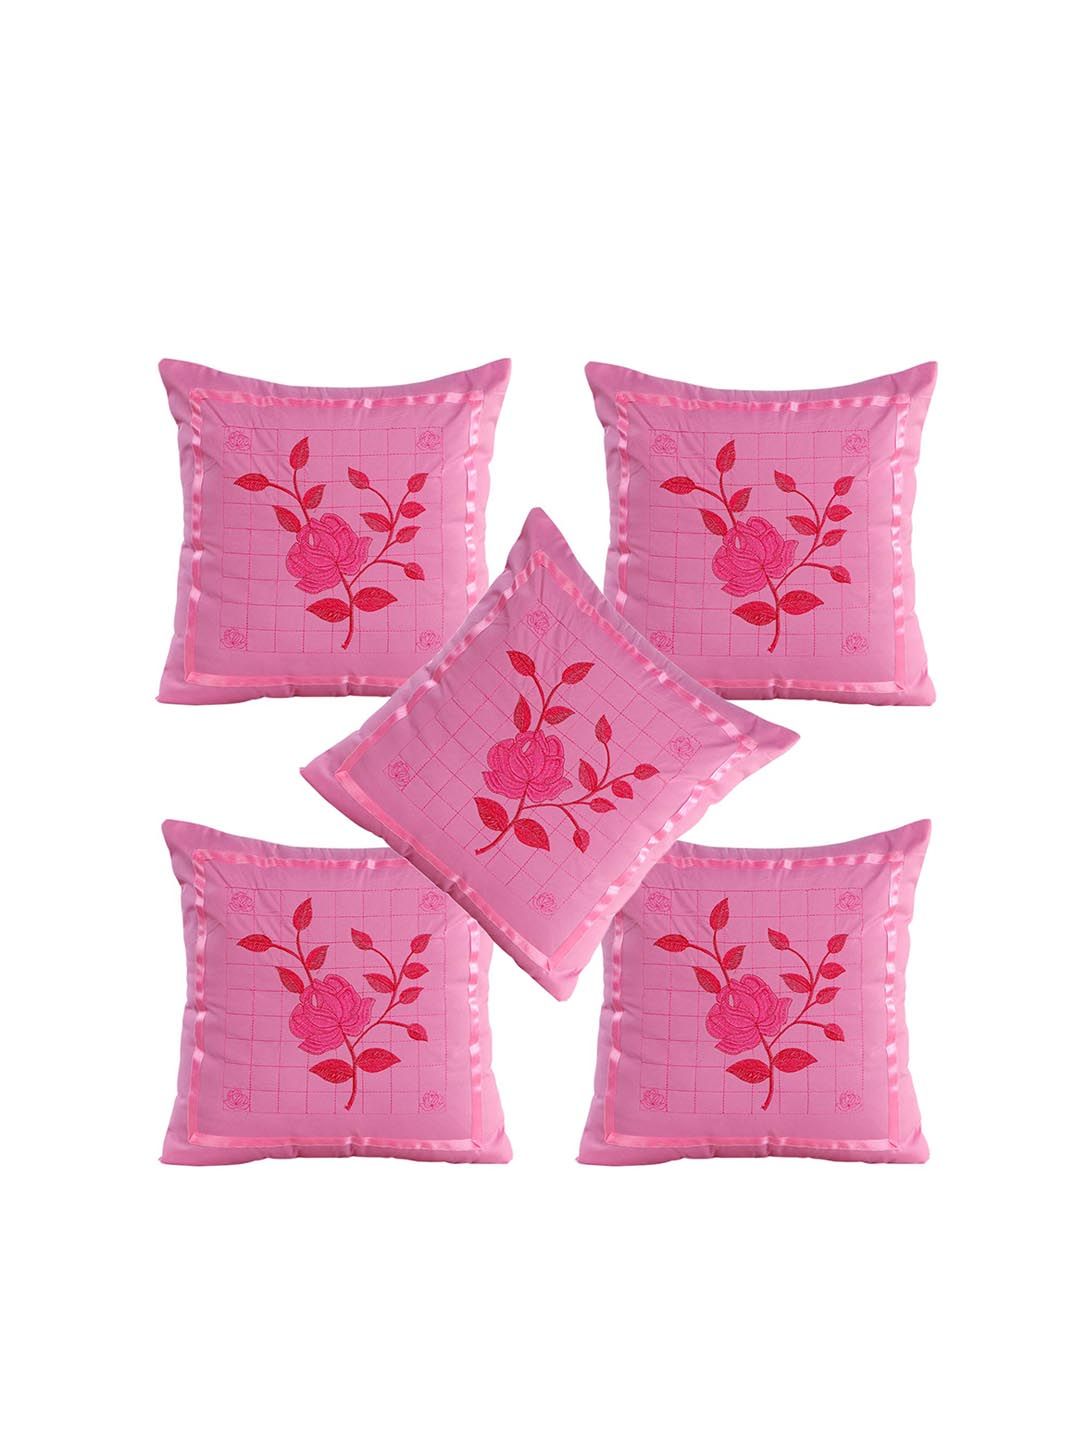 Hammer Home Pink & Red 8-Pieces Embroidered Diwan Set Price in India